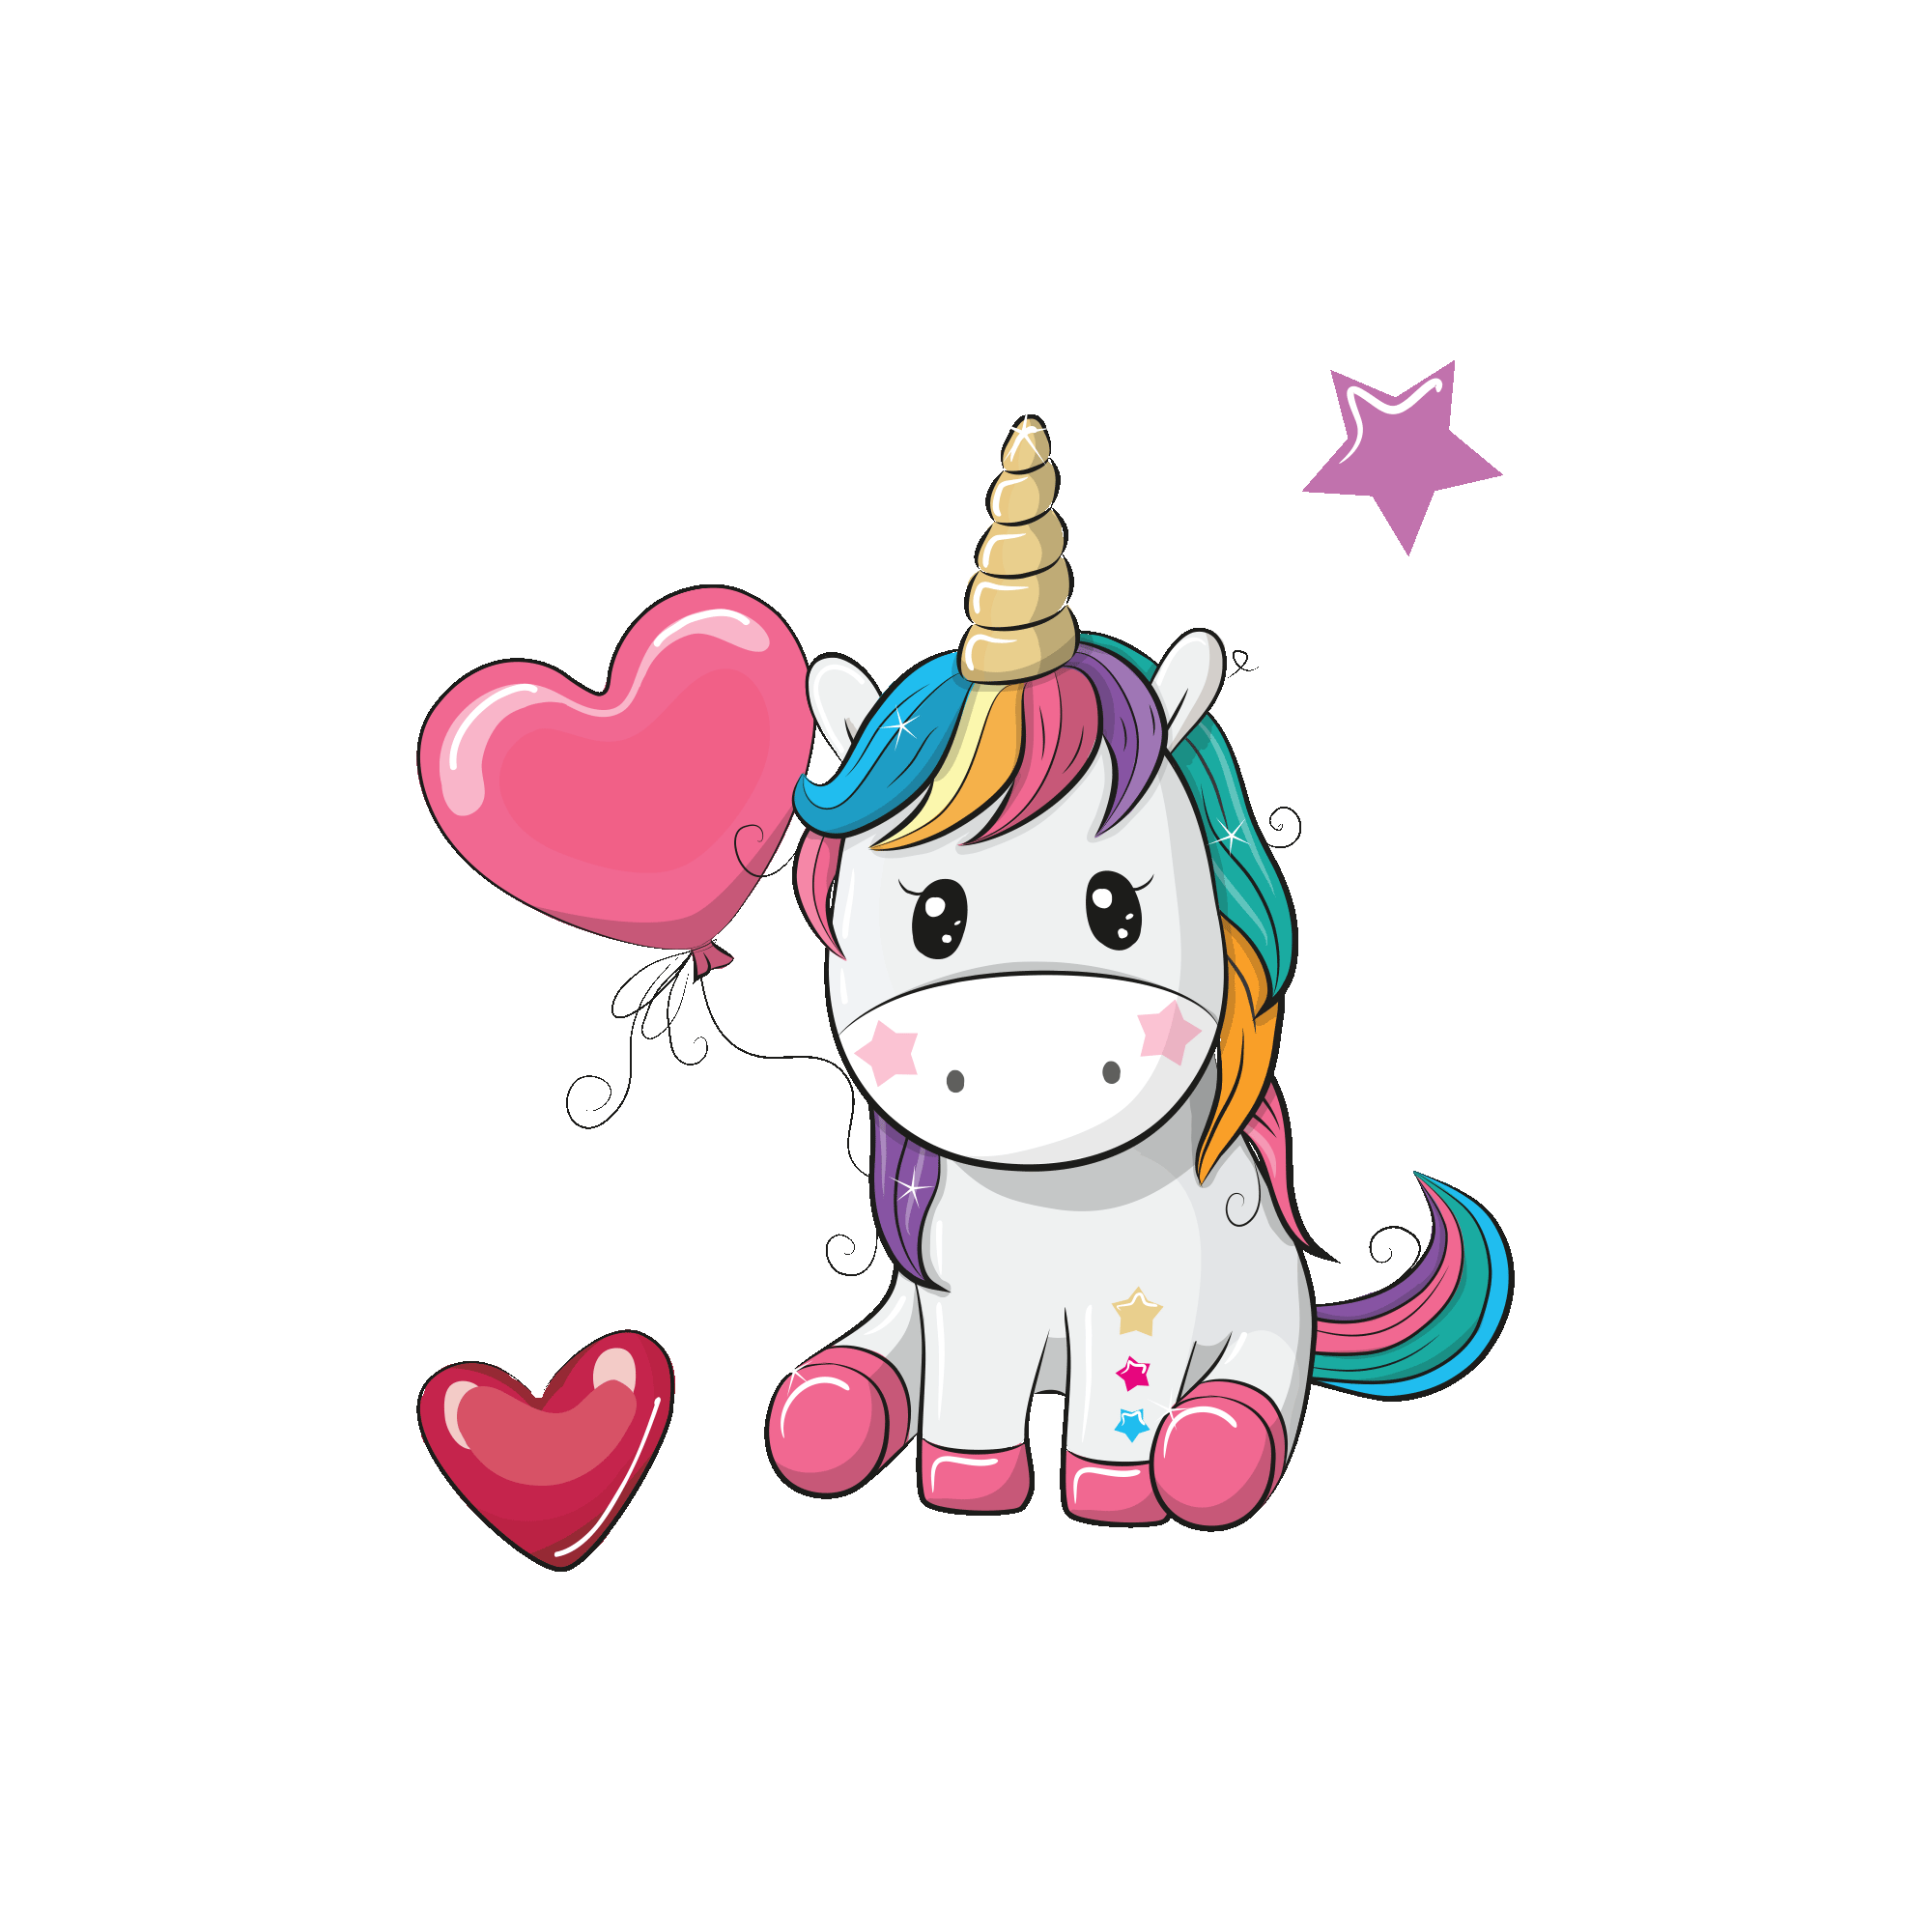 Download Temporary tattoos buy - "Heart unicorn" Color